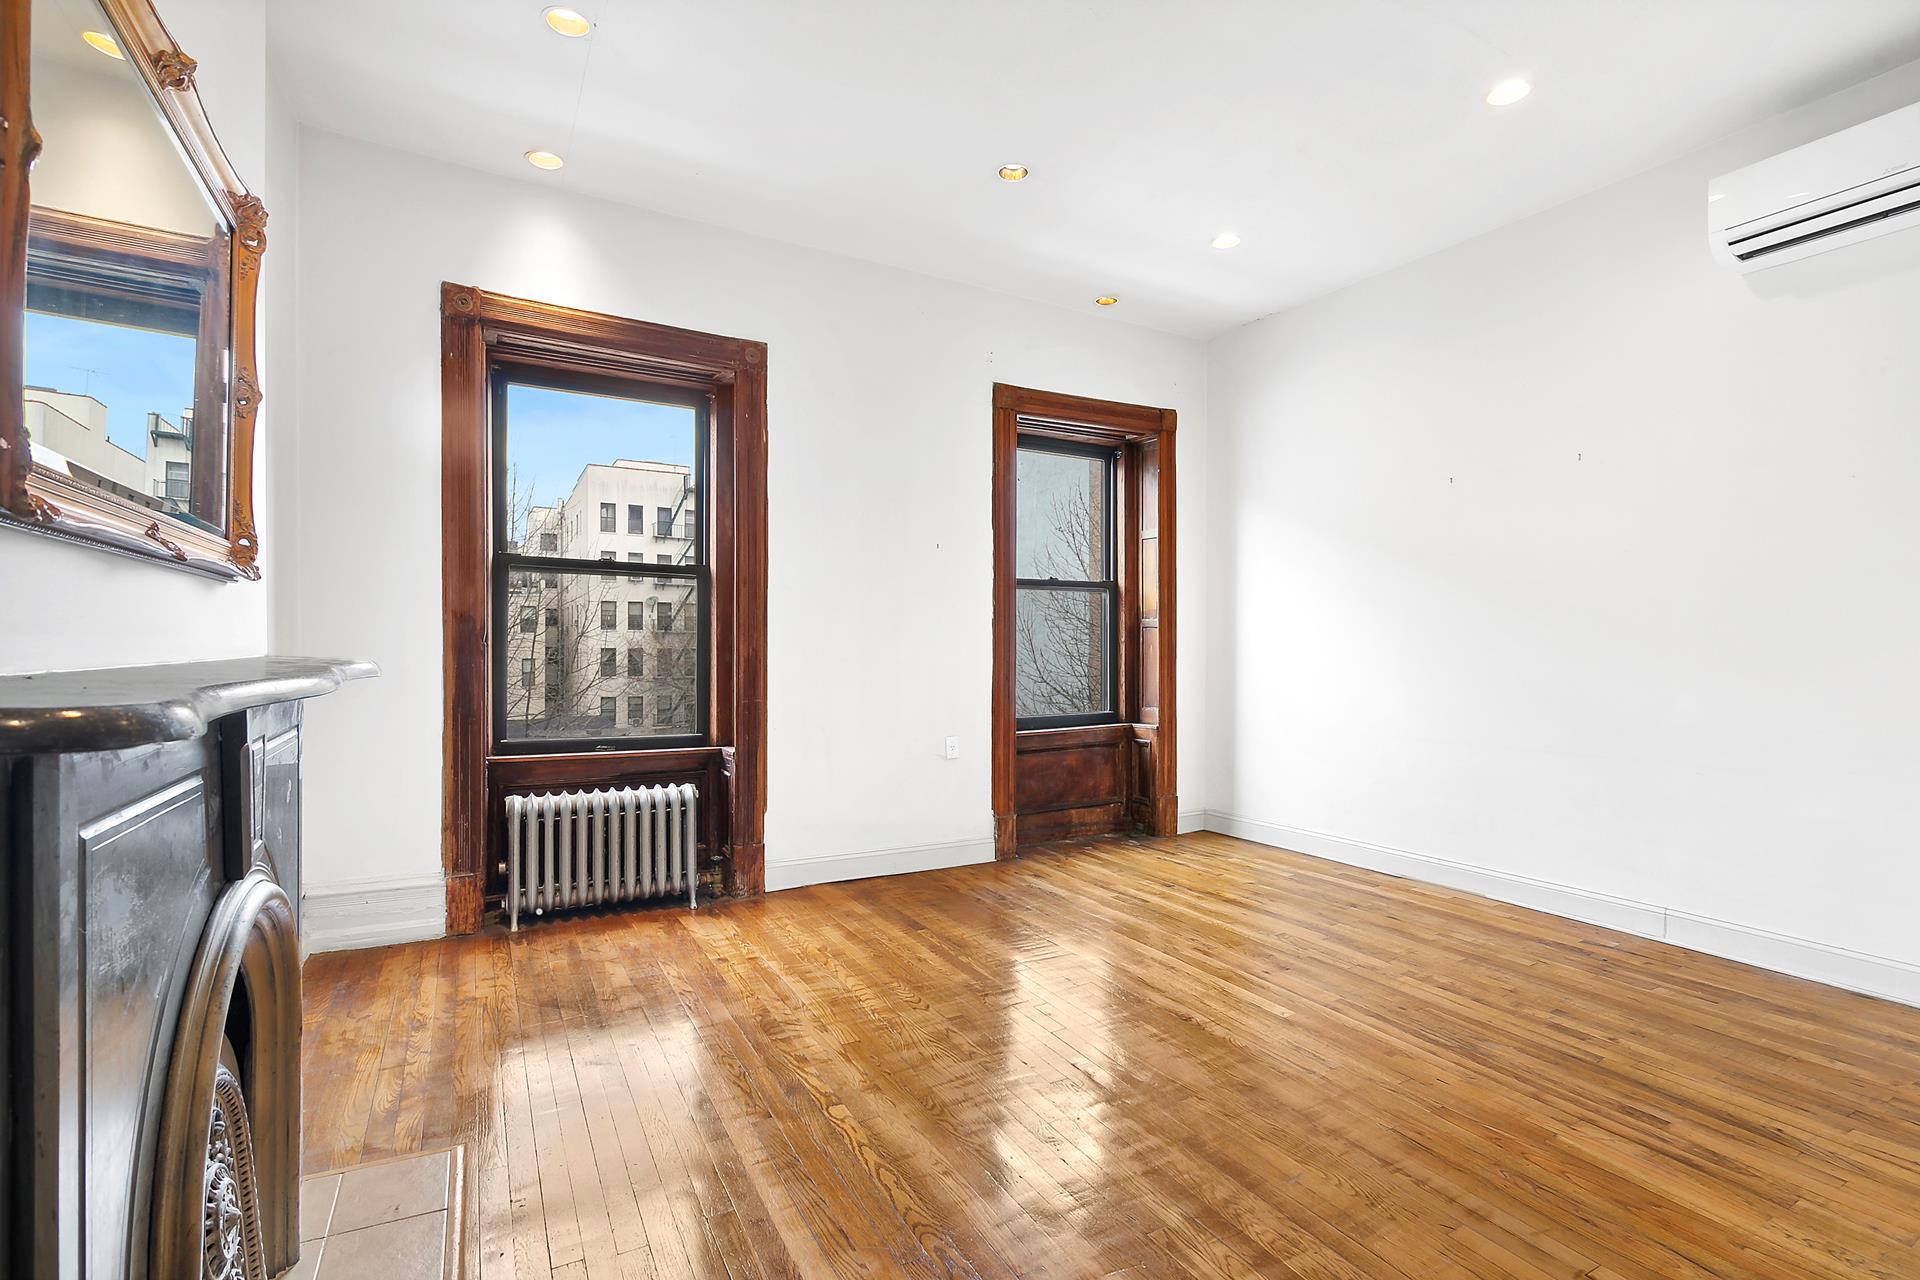 74 West 127th Street 3, Central Harlem, Upper Manhattan, NYC - 1 Bedrooms  
1 Bathrooms  
3 Rooms - 